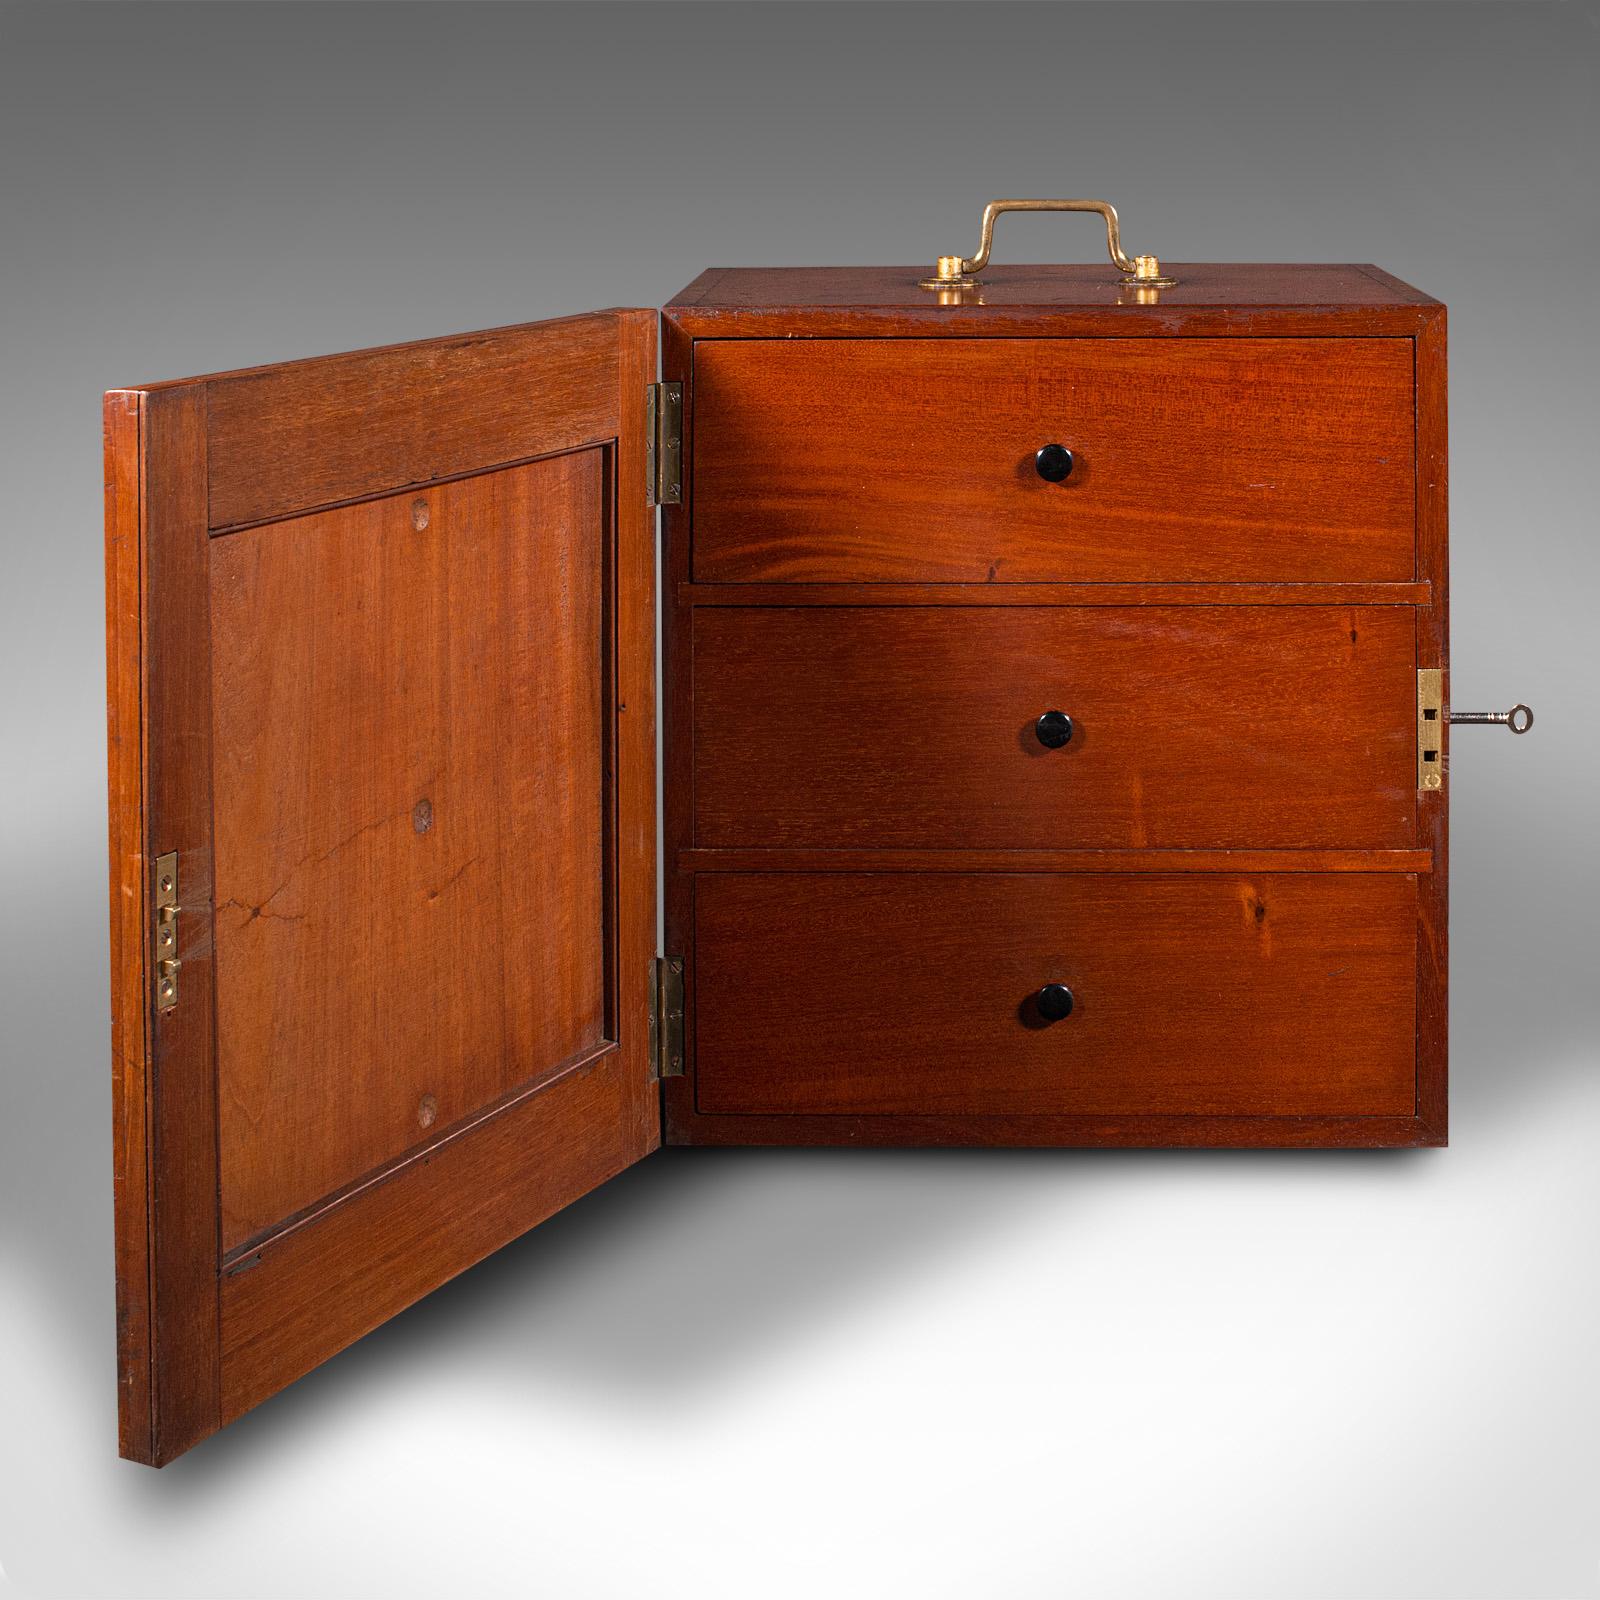 Antique Calligrapher's Case, English, Specimen, Collector's Cabinet, Victorian In Good Condition For Sale In Hele, Devon, GB